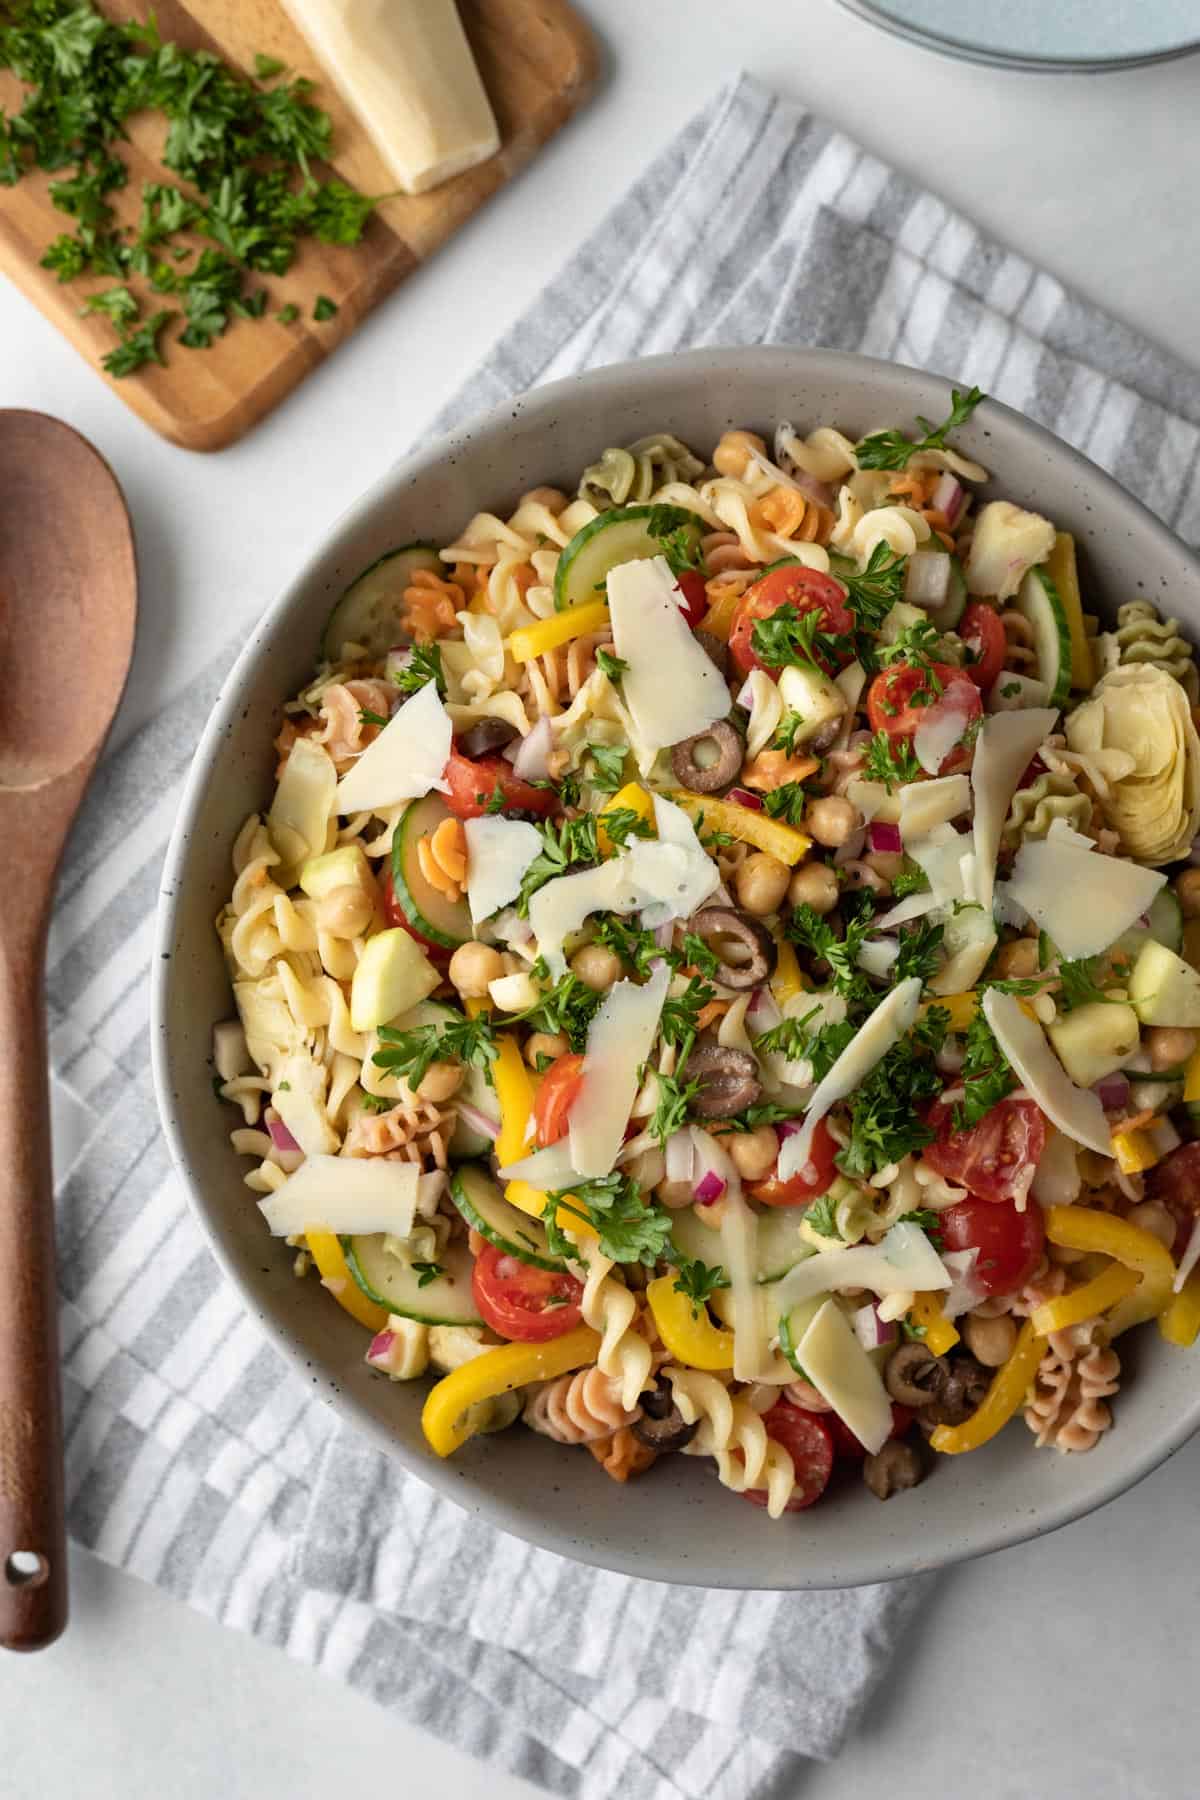 large gray serving bowl filled with colorful veggies and pasta salad.